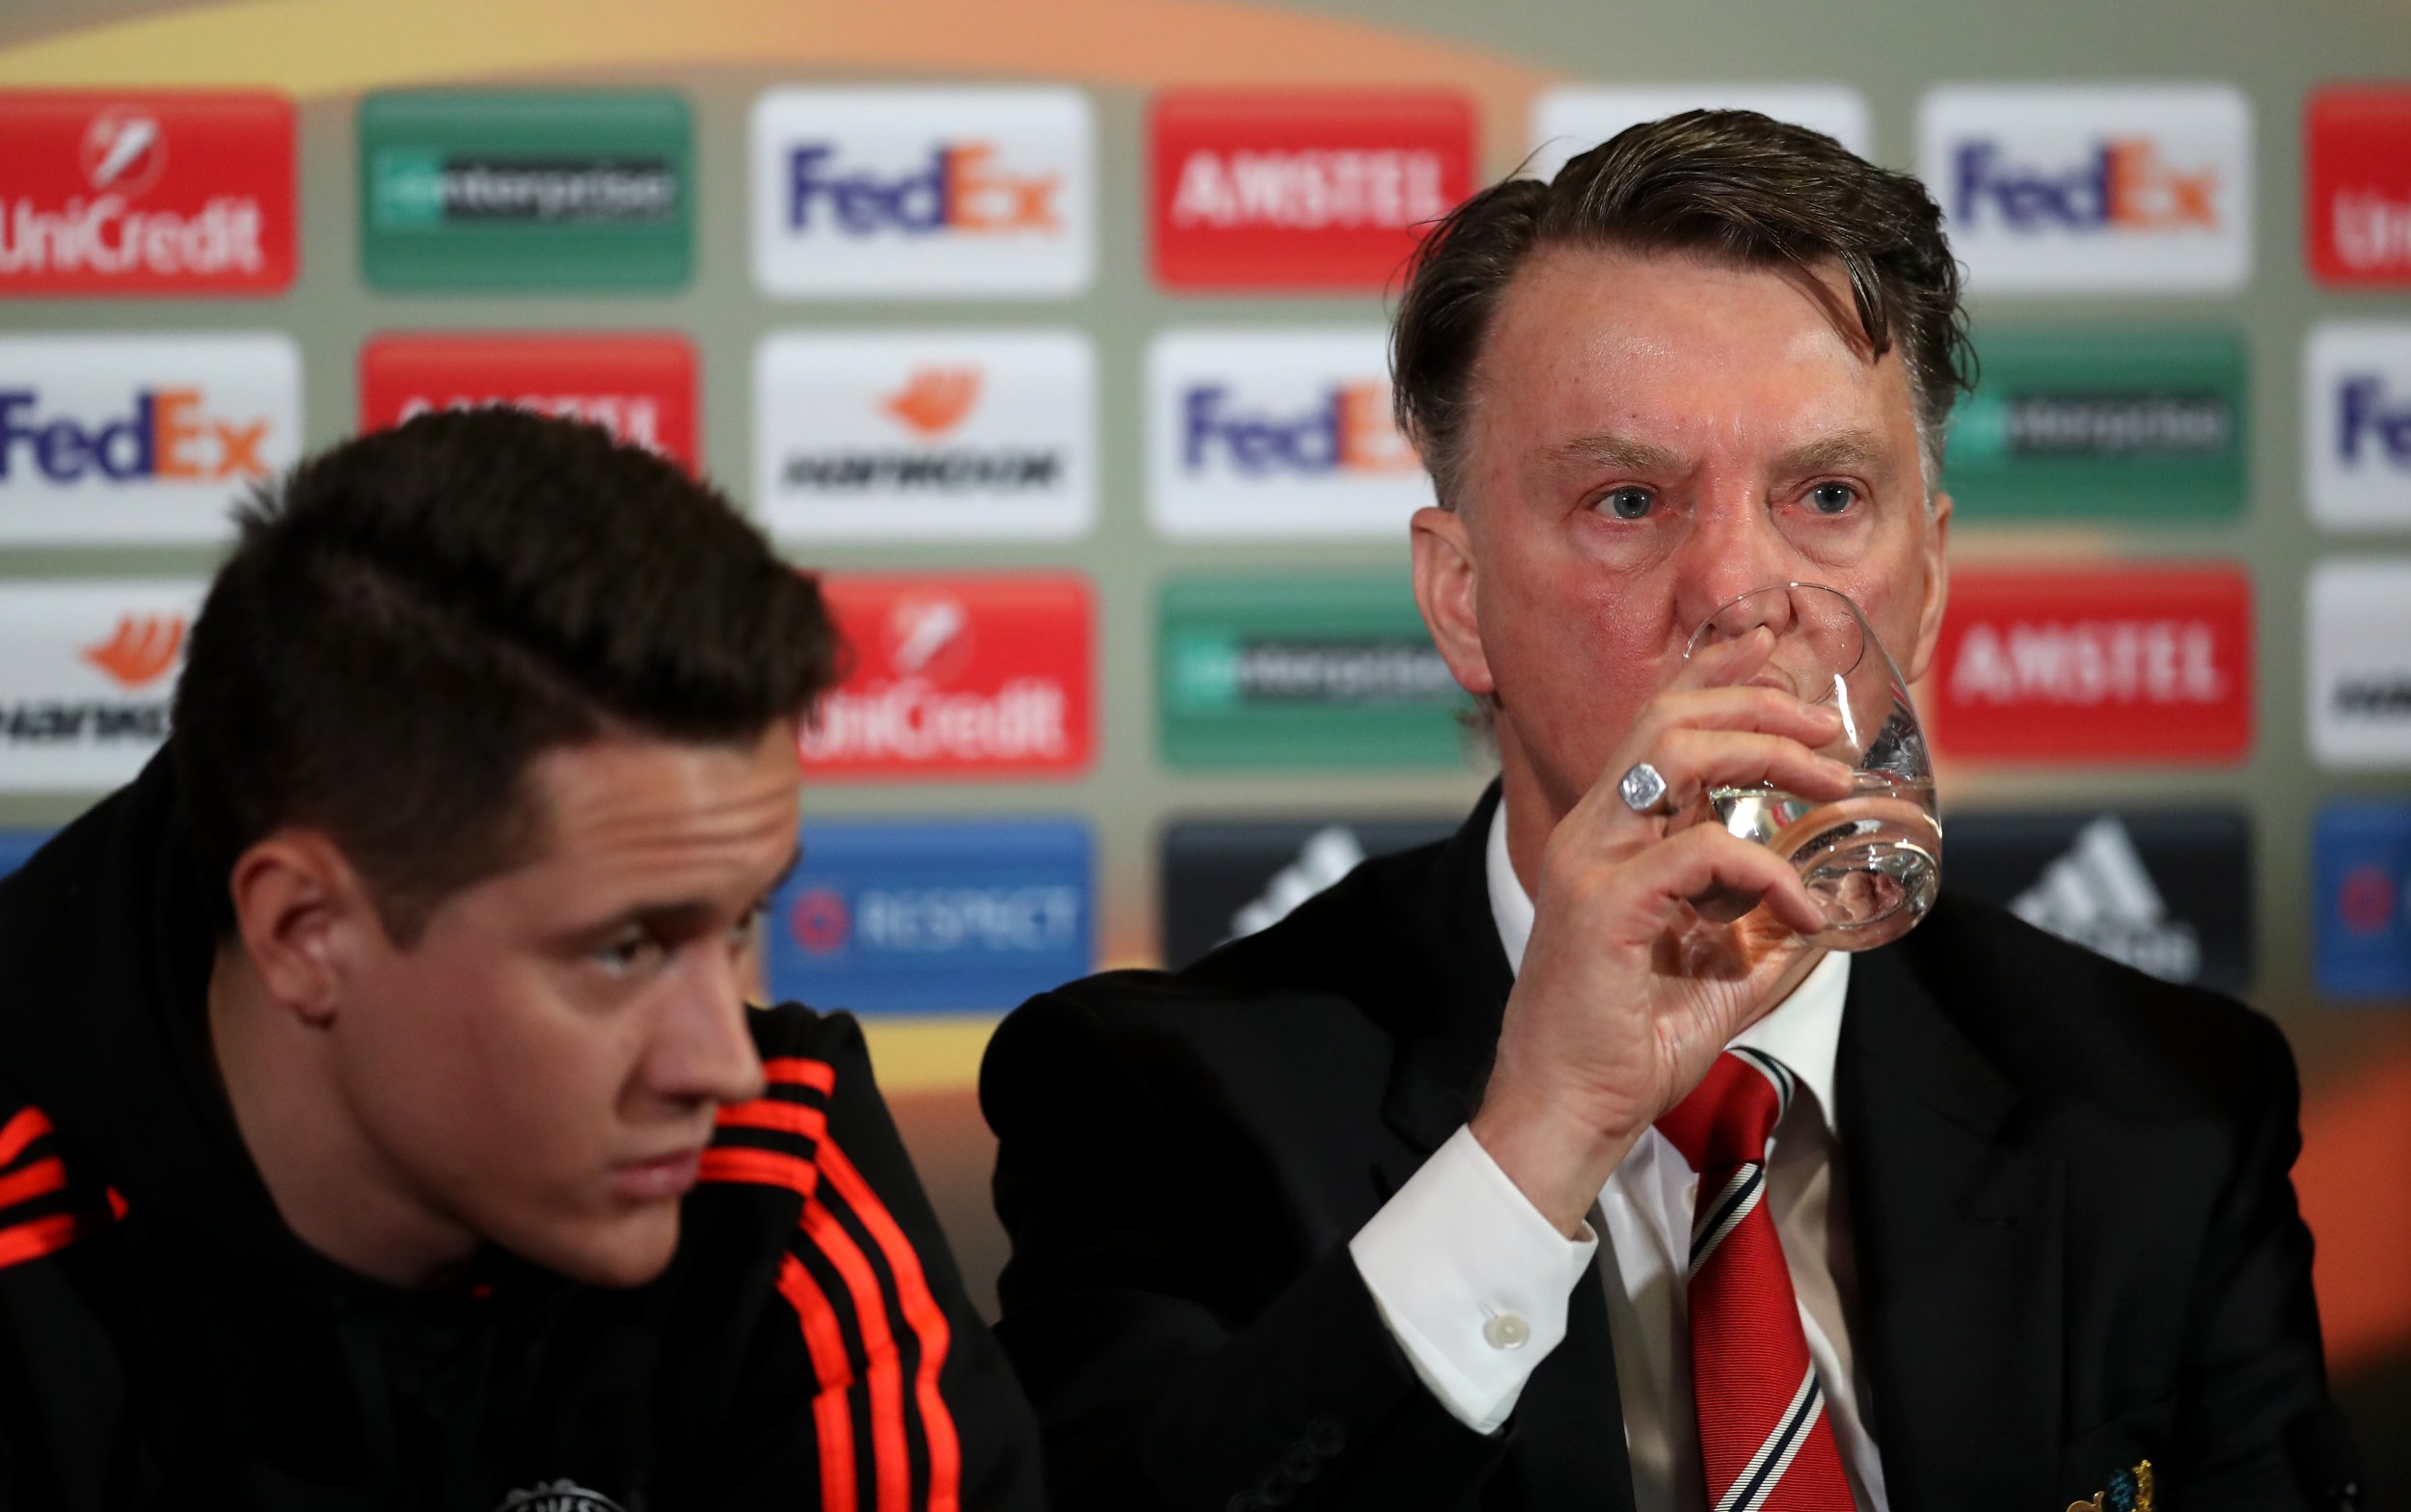 Louis Van Gaal's Manchester United faces Liverpool in the Europa League on Thursday evening.